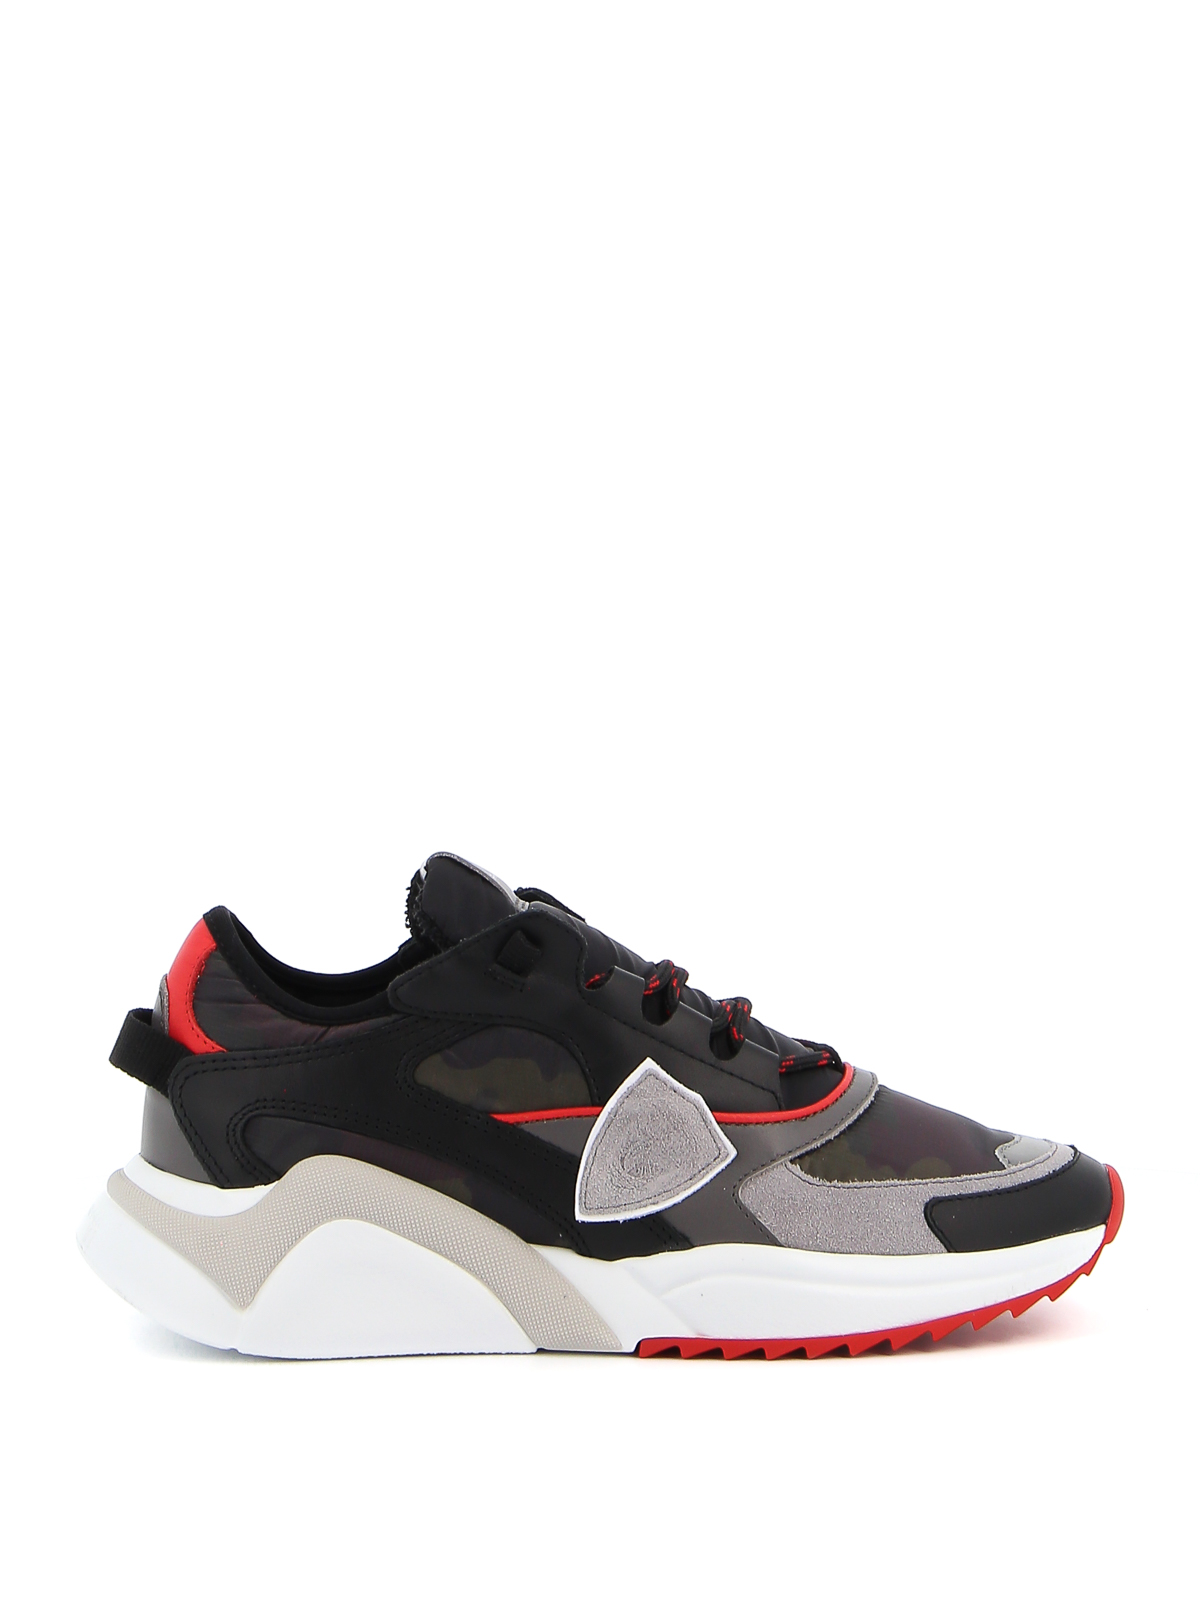 Trainers Philippe Model - Eze Camouflage sneakers - EZLUCC03